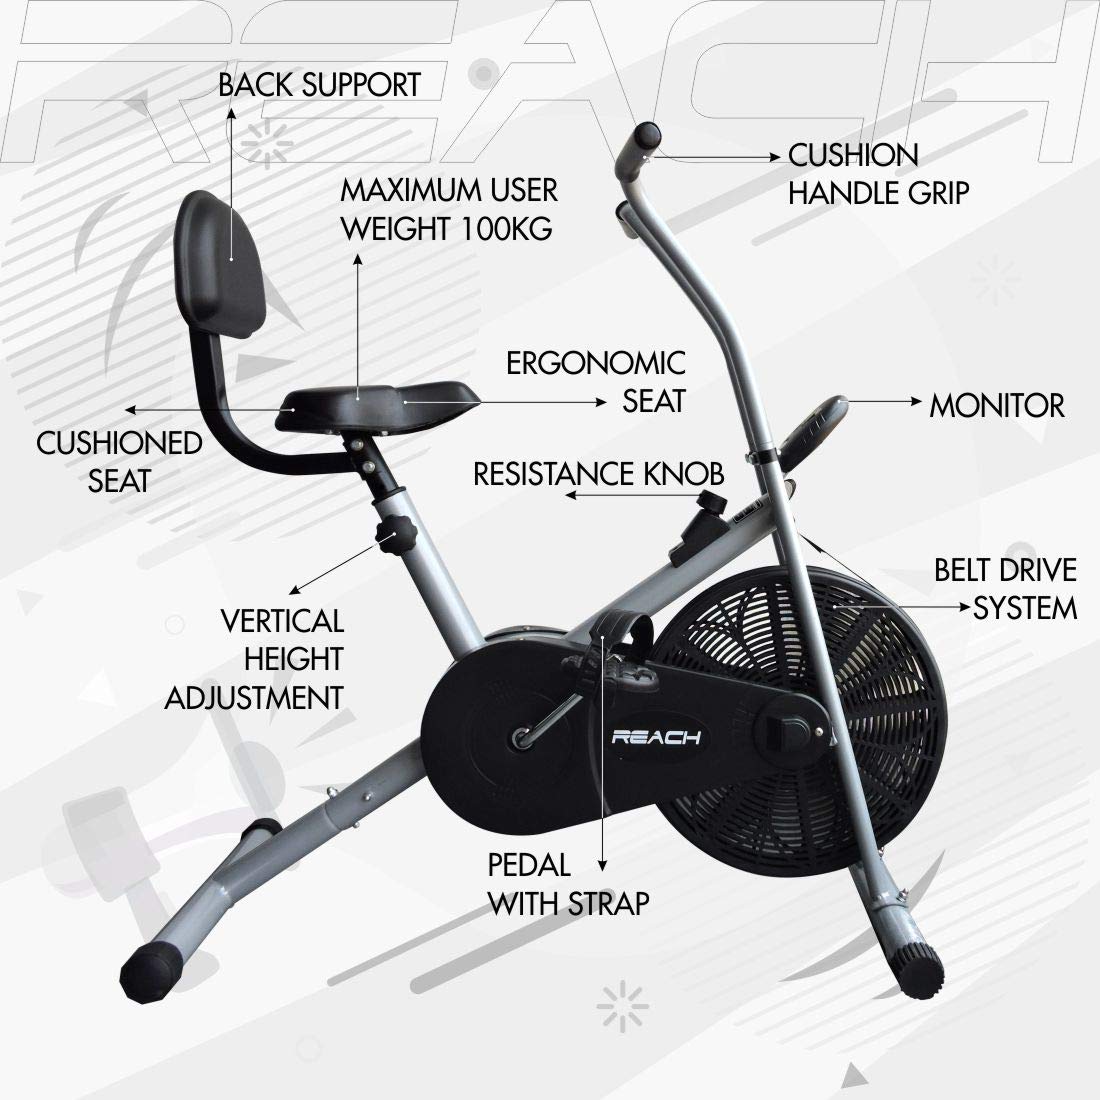 Reach AB-90 Air Bike Exercise Cycle Indoor Gym Equipment | Stationary Upright Exercise Bike for Fitness & Cardio Workouts | Suitable for Weight Loss Exercise with Adjustable Seat & Resistance